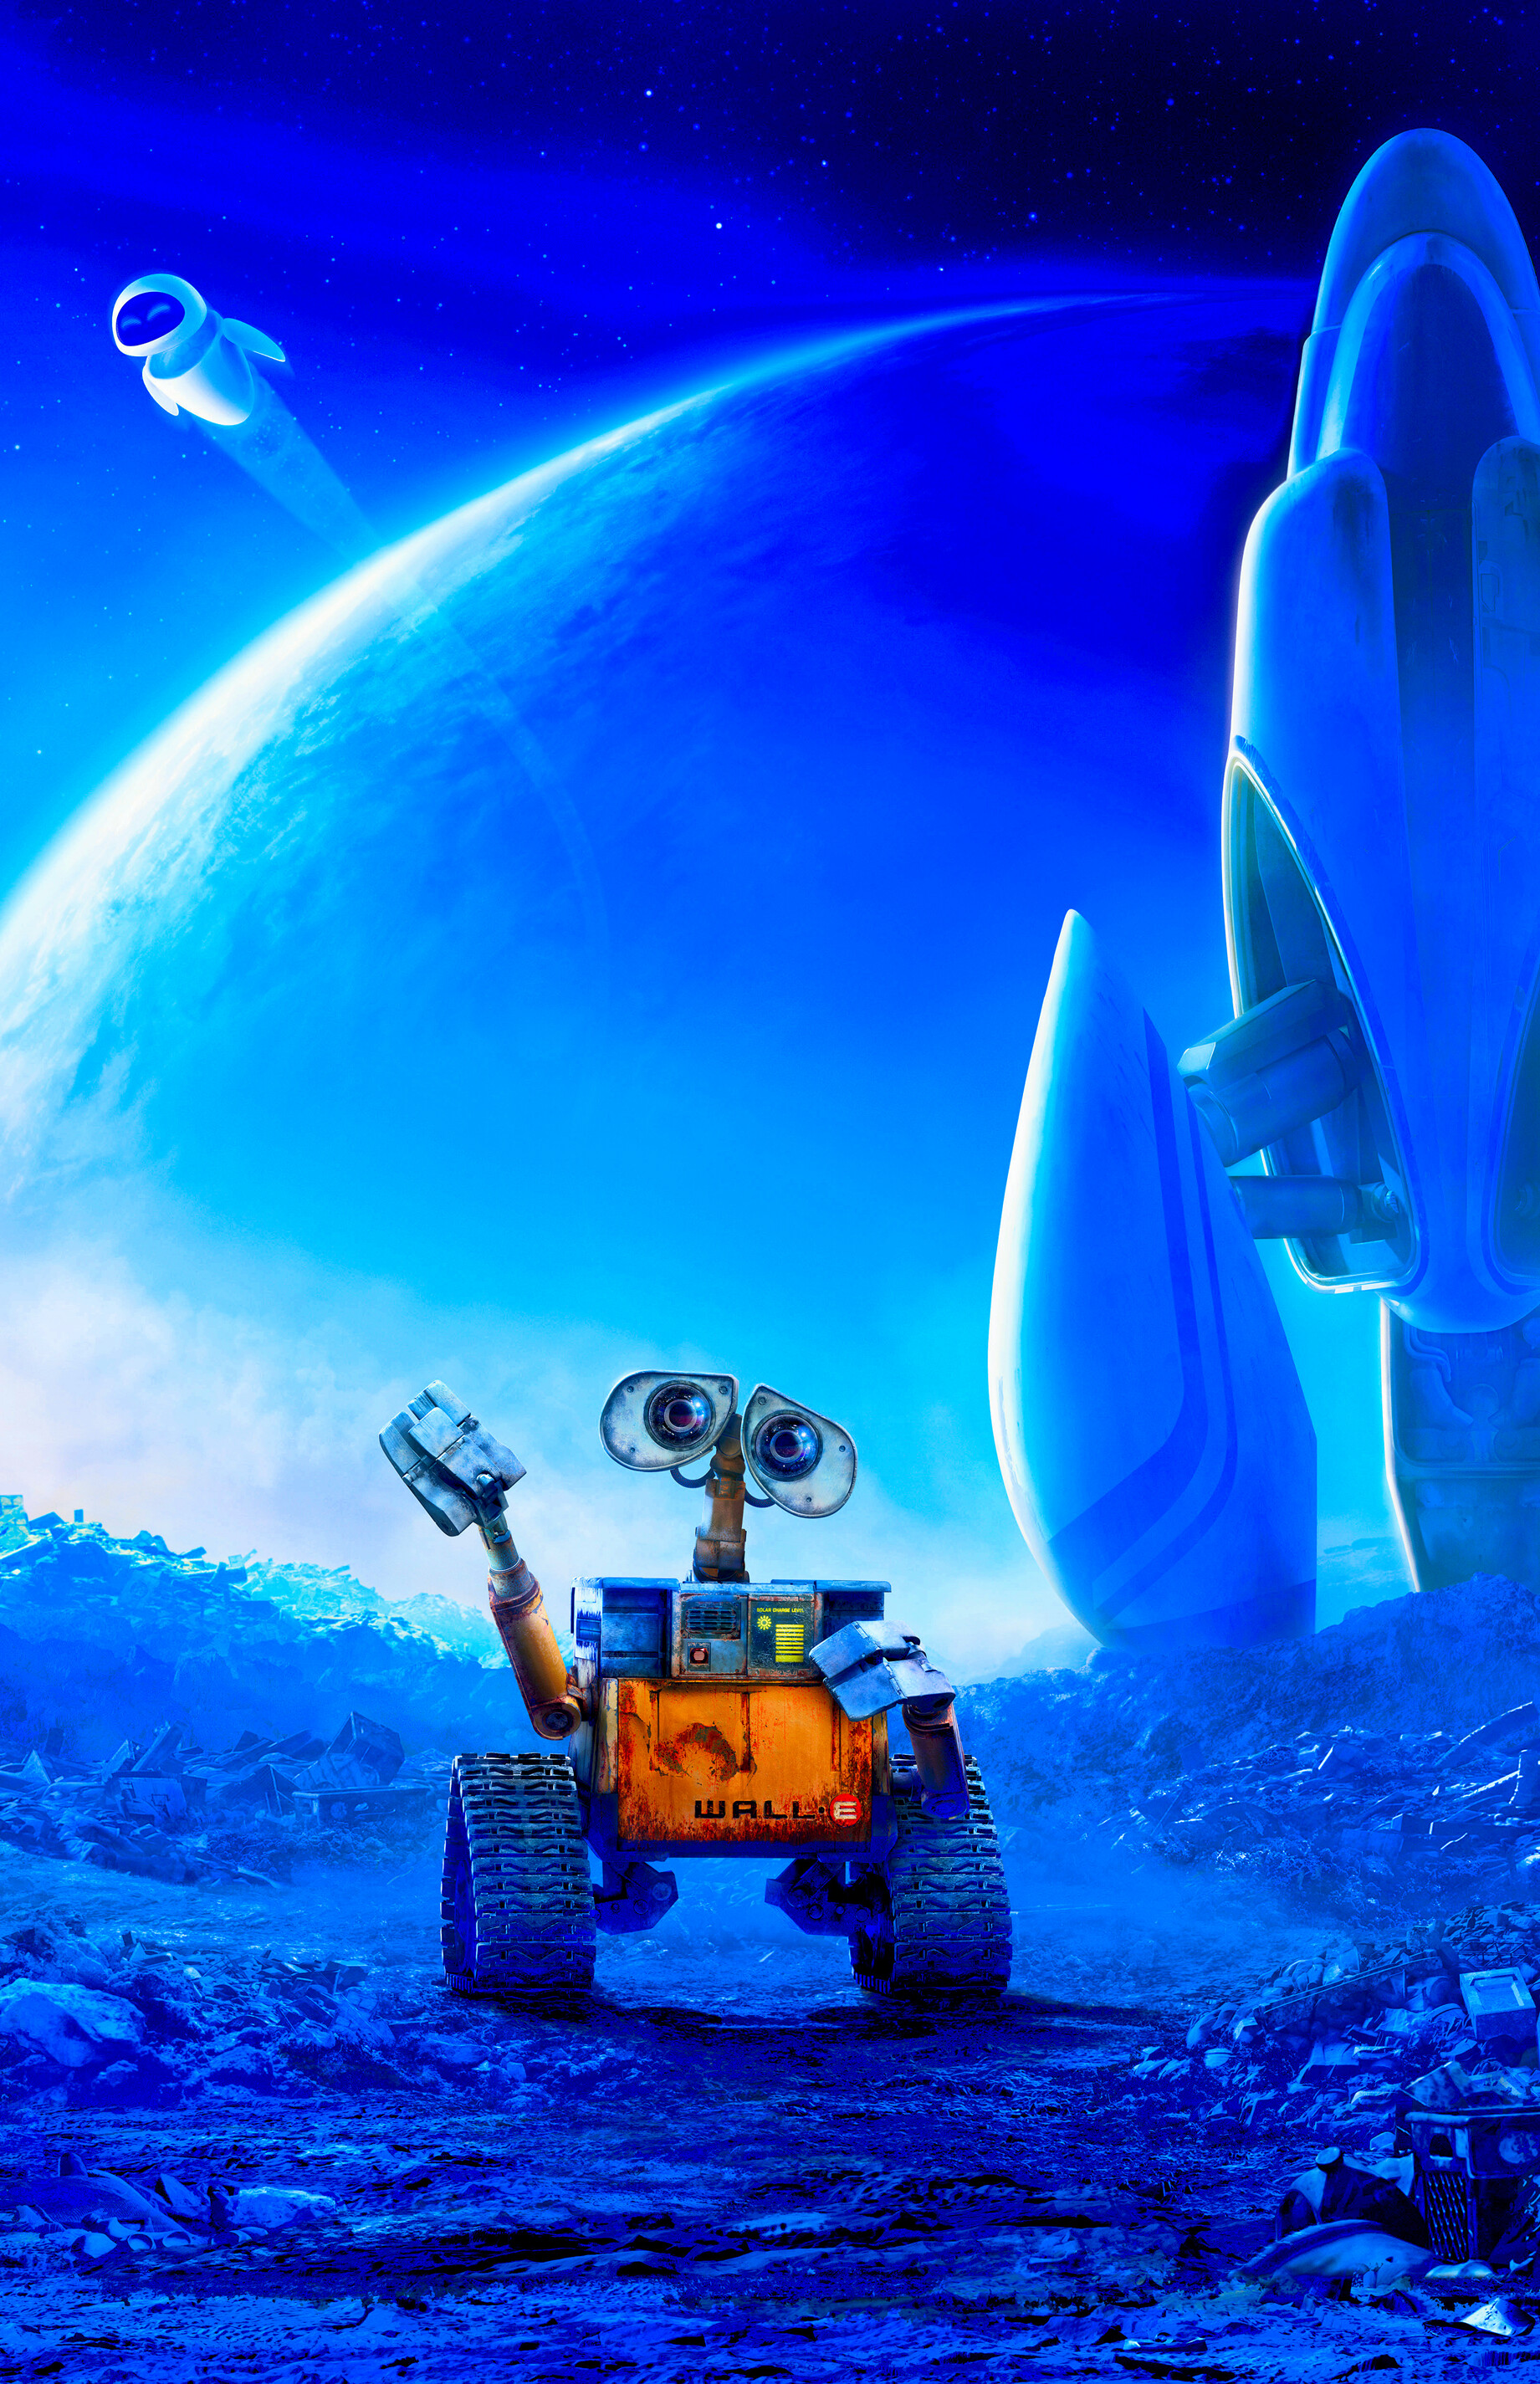 WALL·E: The film incorporates various topics including consumerism, corporatocracy, nostalgia, waste management, human environmental impact and concerns, obesity-sedentary lifestyles, and global catastrophic risk. 1850x2850 HD Background.